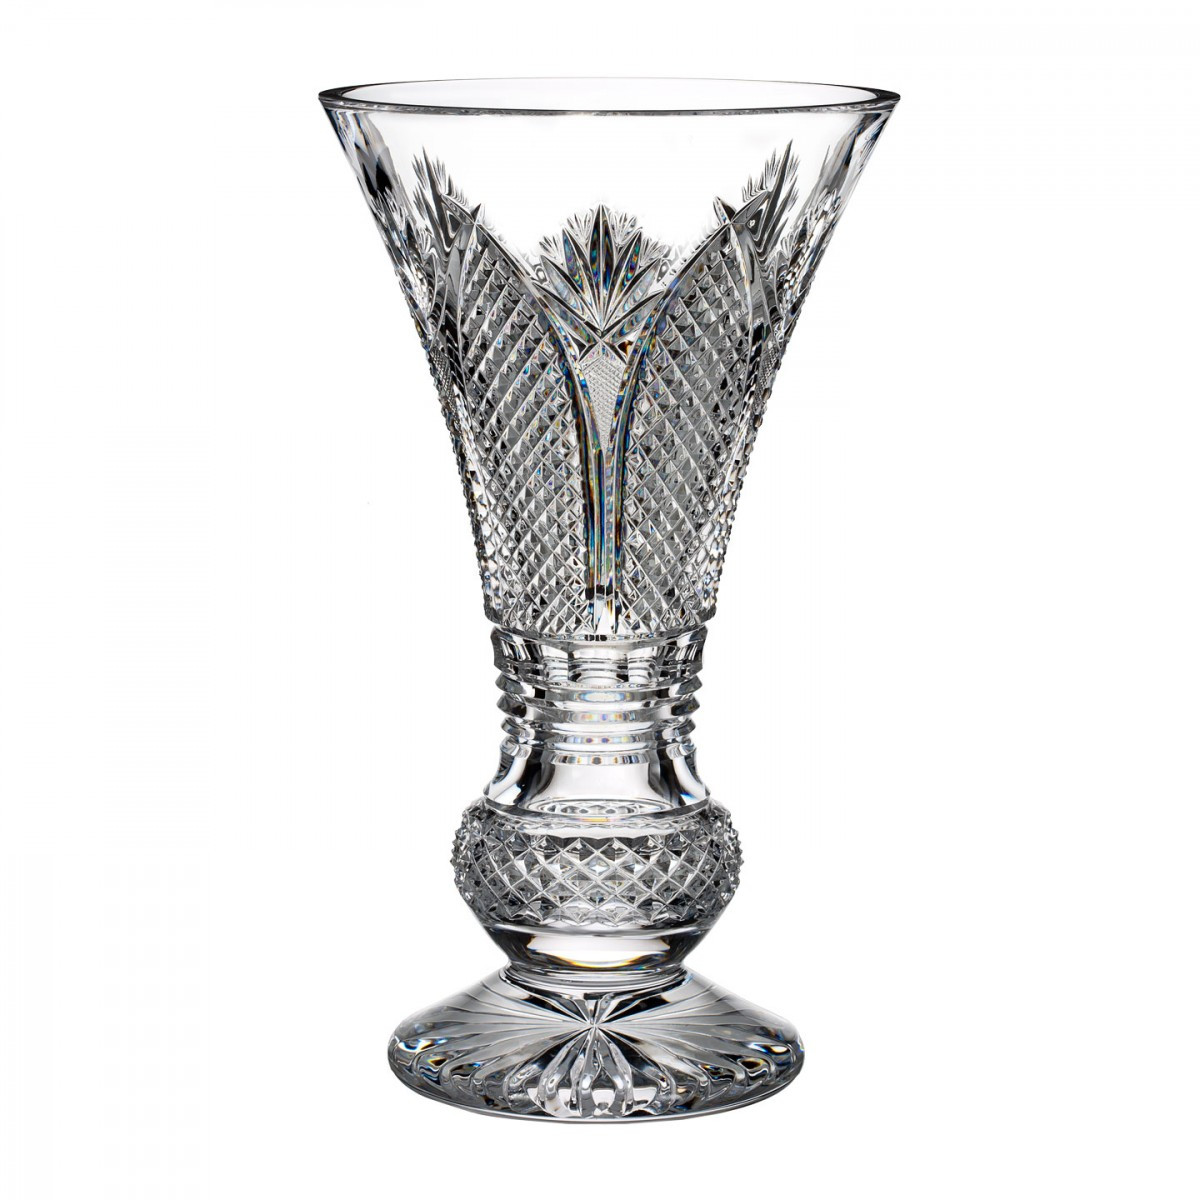 30 Great Marquis by Waterford Rainfall Vase 11 2024 free download marquis by waterford rainfall vase 11 of designer studio billy briggs dunmore vase limited edition of 250 for designer studio billy briggs dunmore vase limited edition of 250